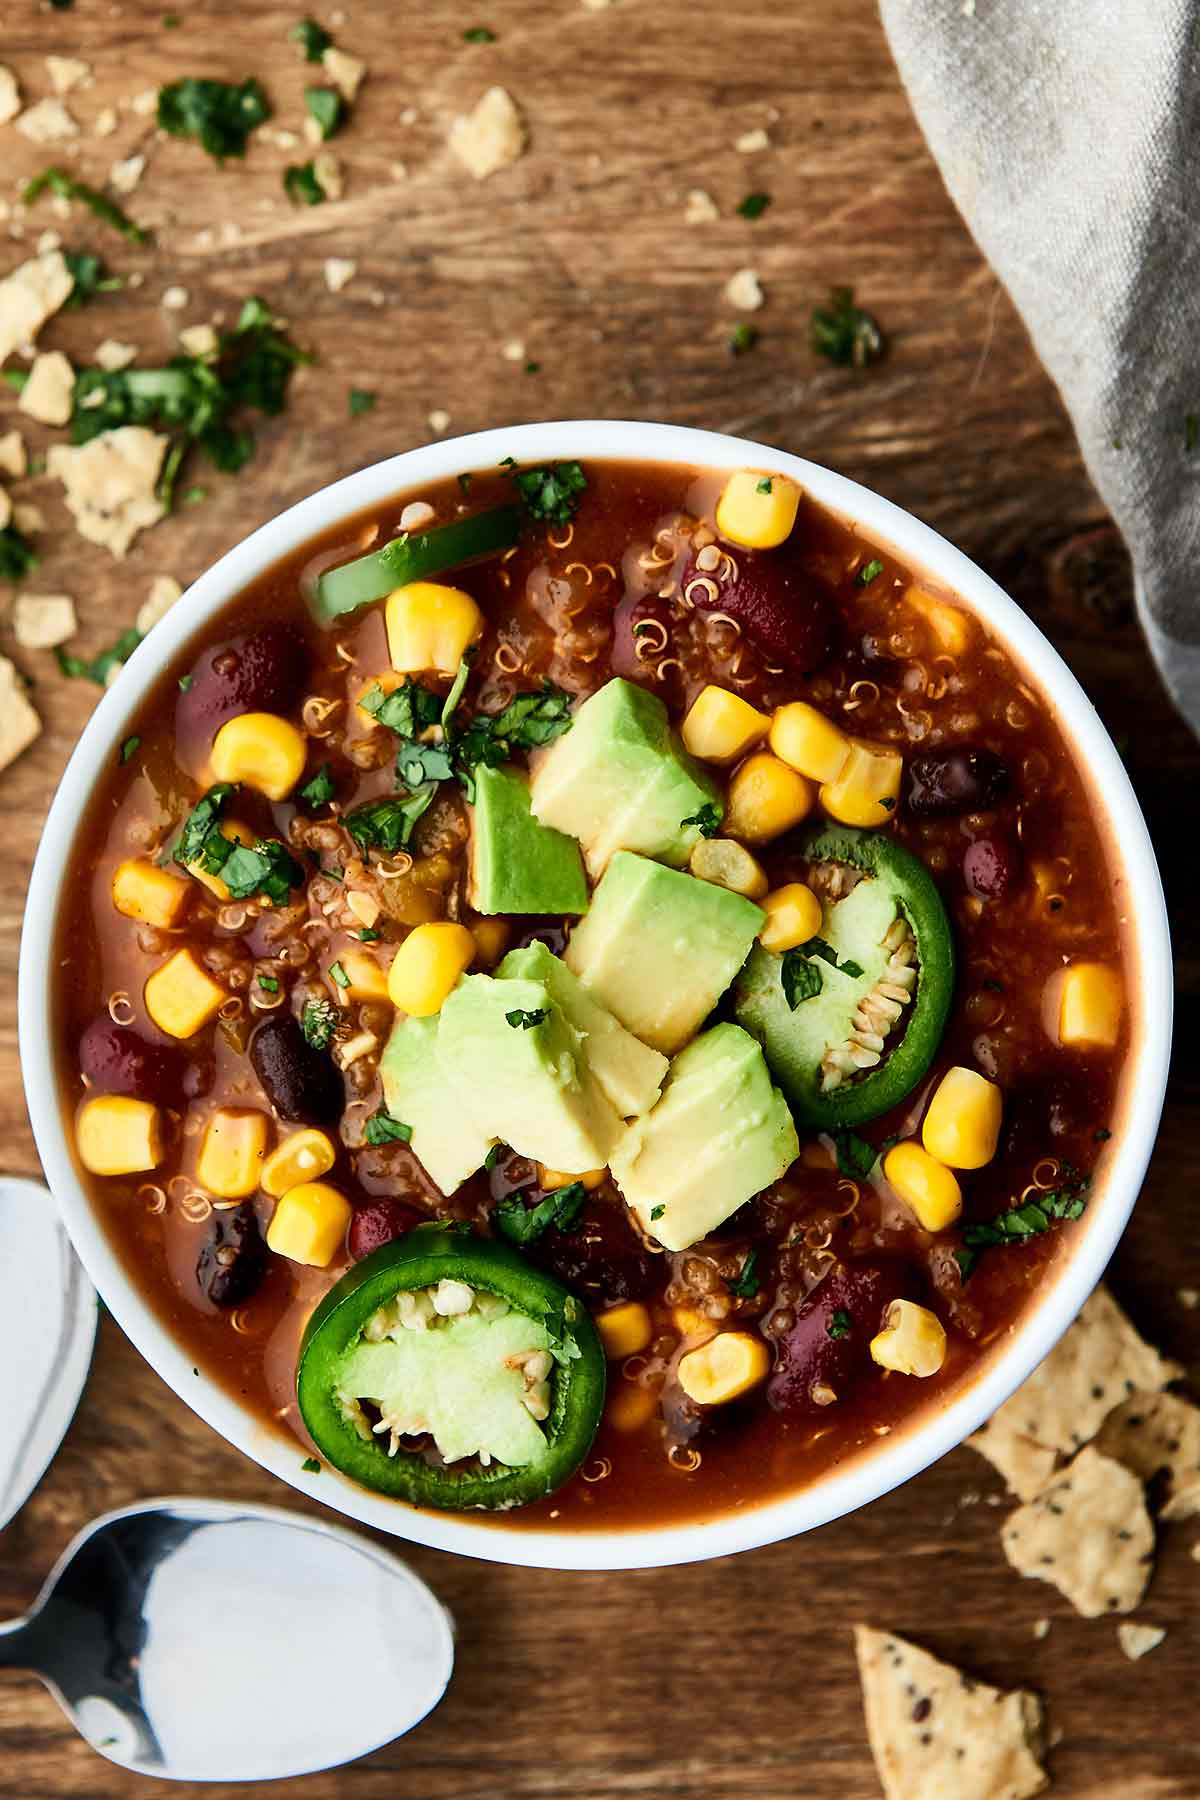 Healthy Instant Pot Recipes Vegetarian
 Instant Pot Ve arian Chili Recipe Ready in 30 Mins